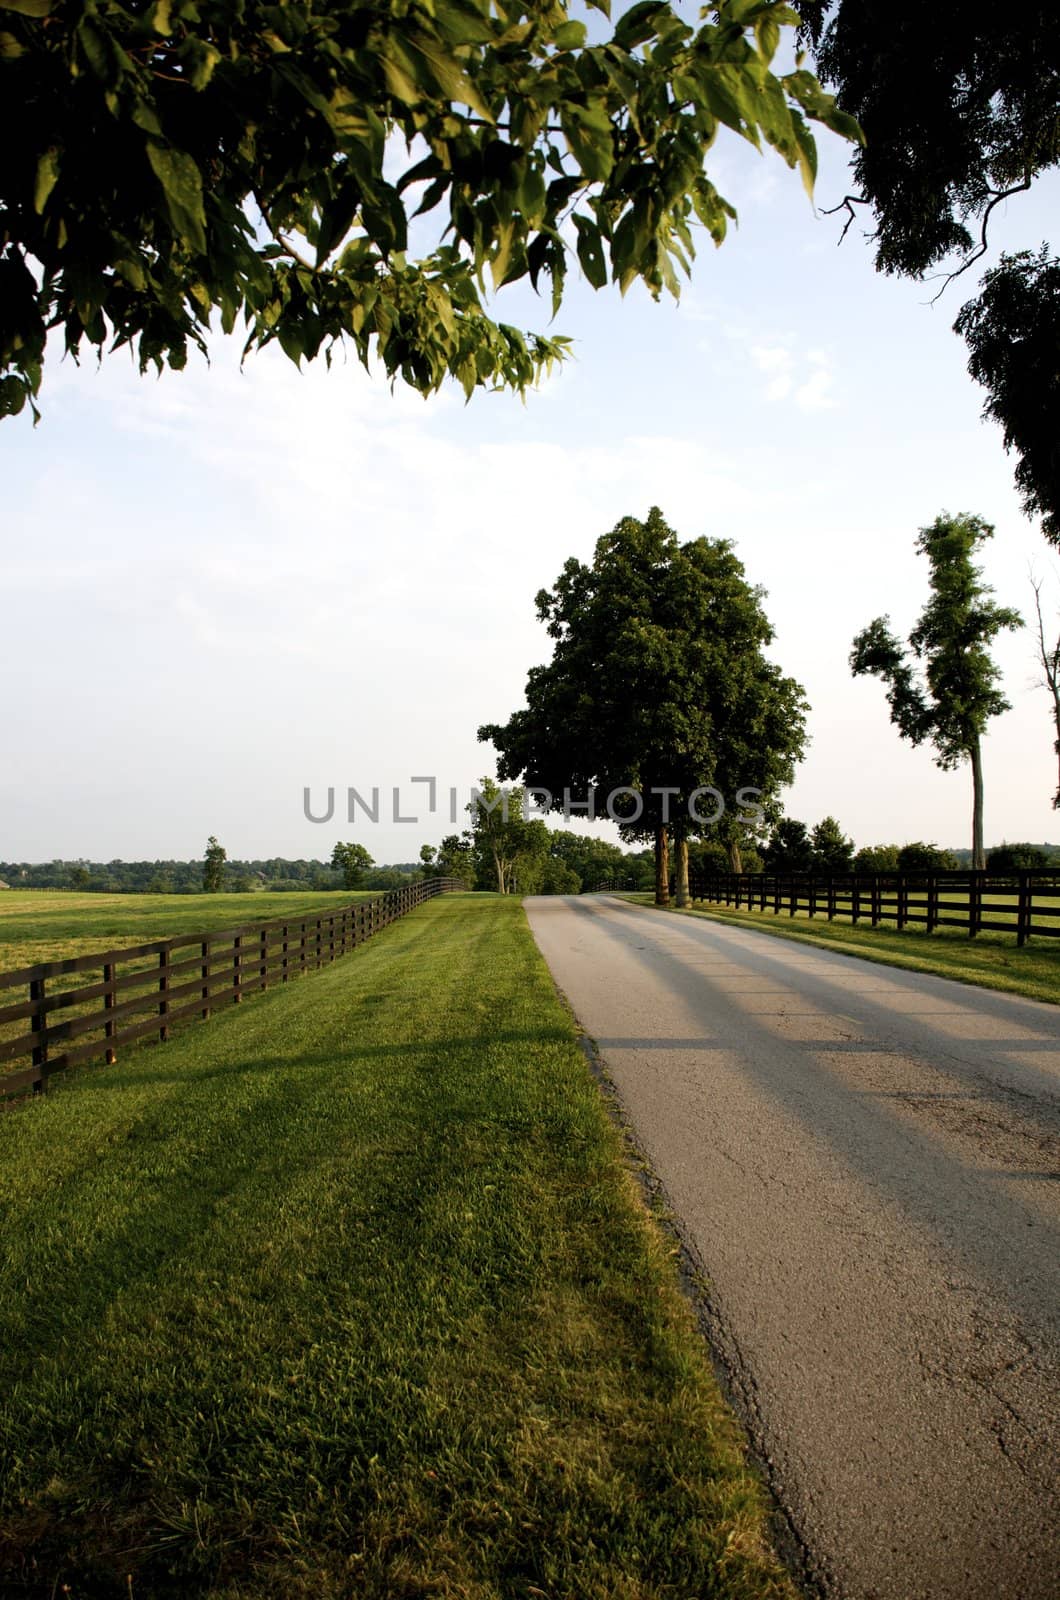 Kentucky Country Road by jedphoto